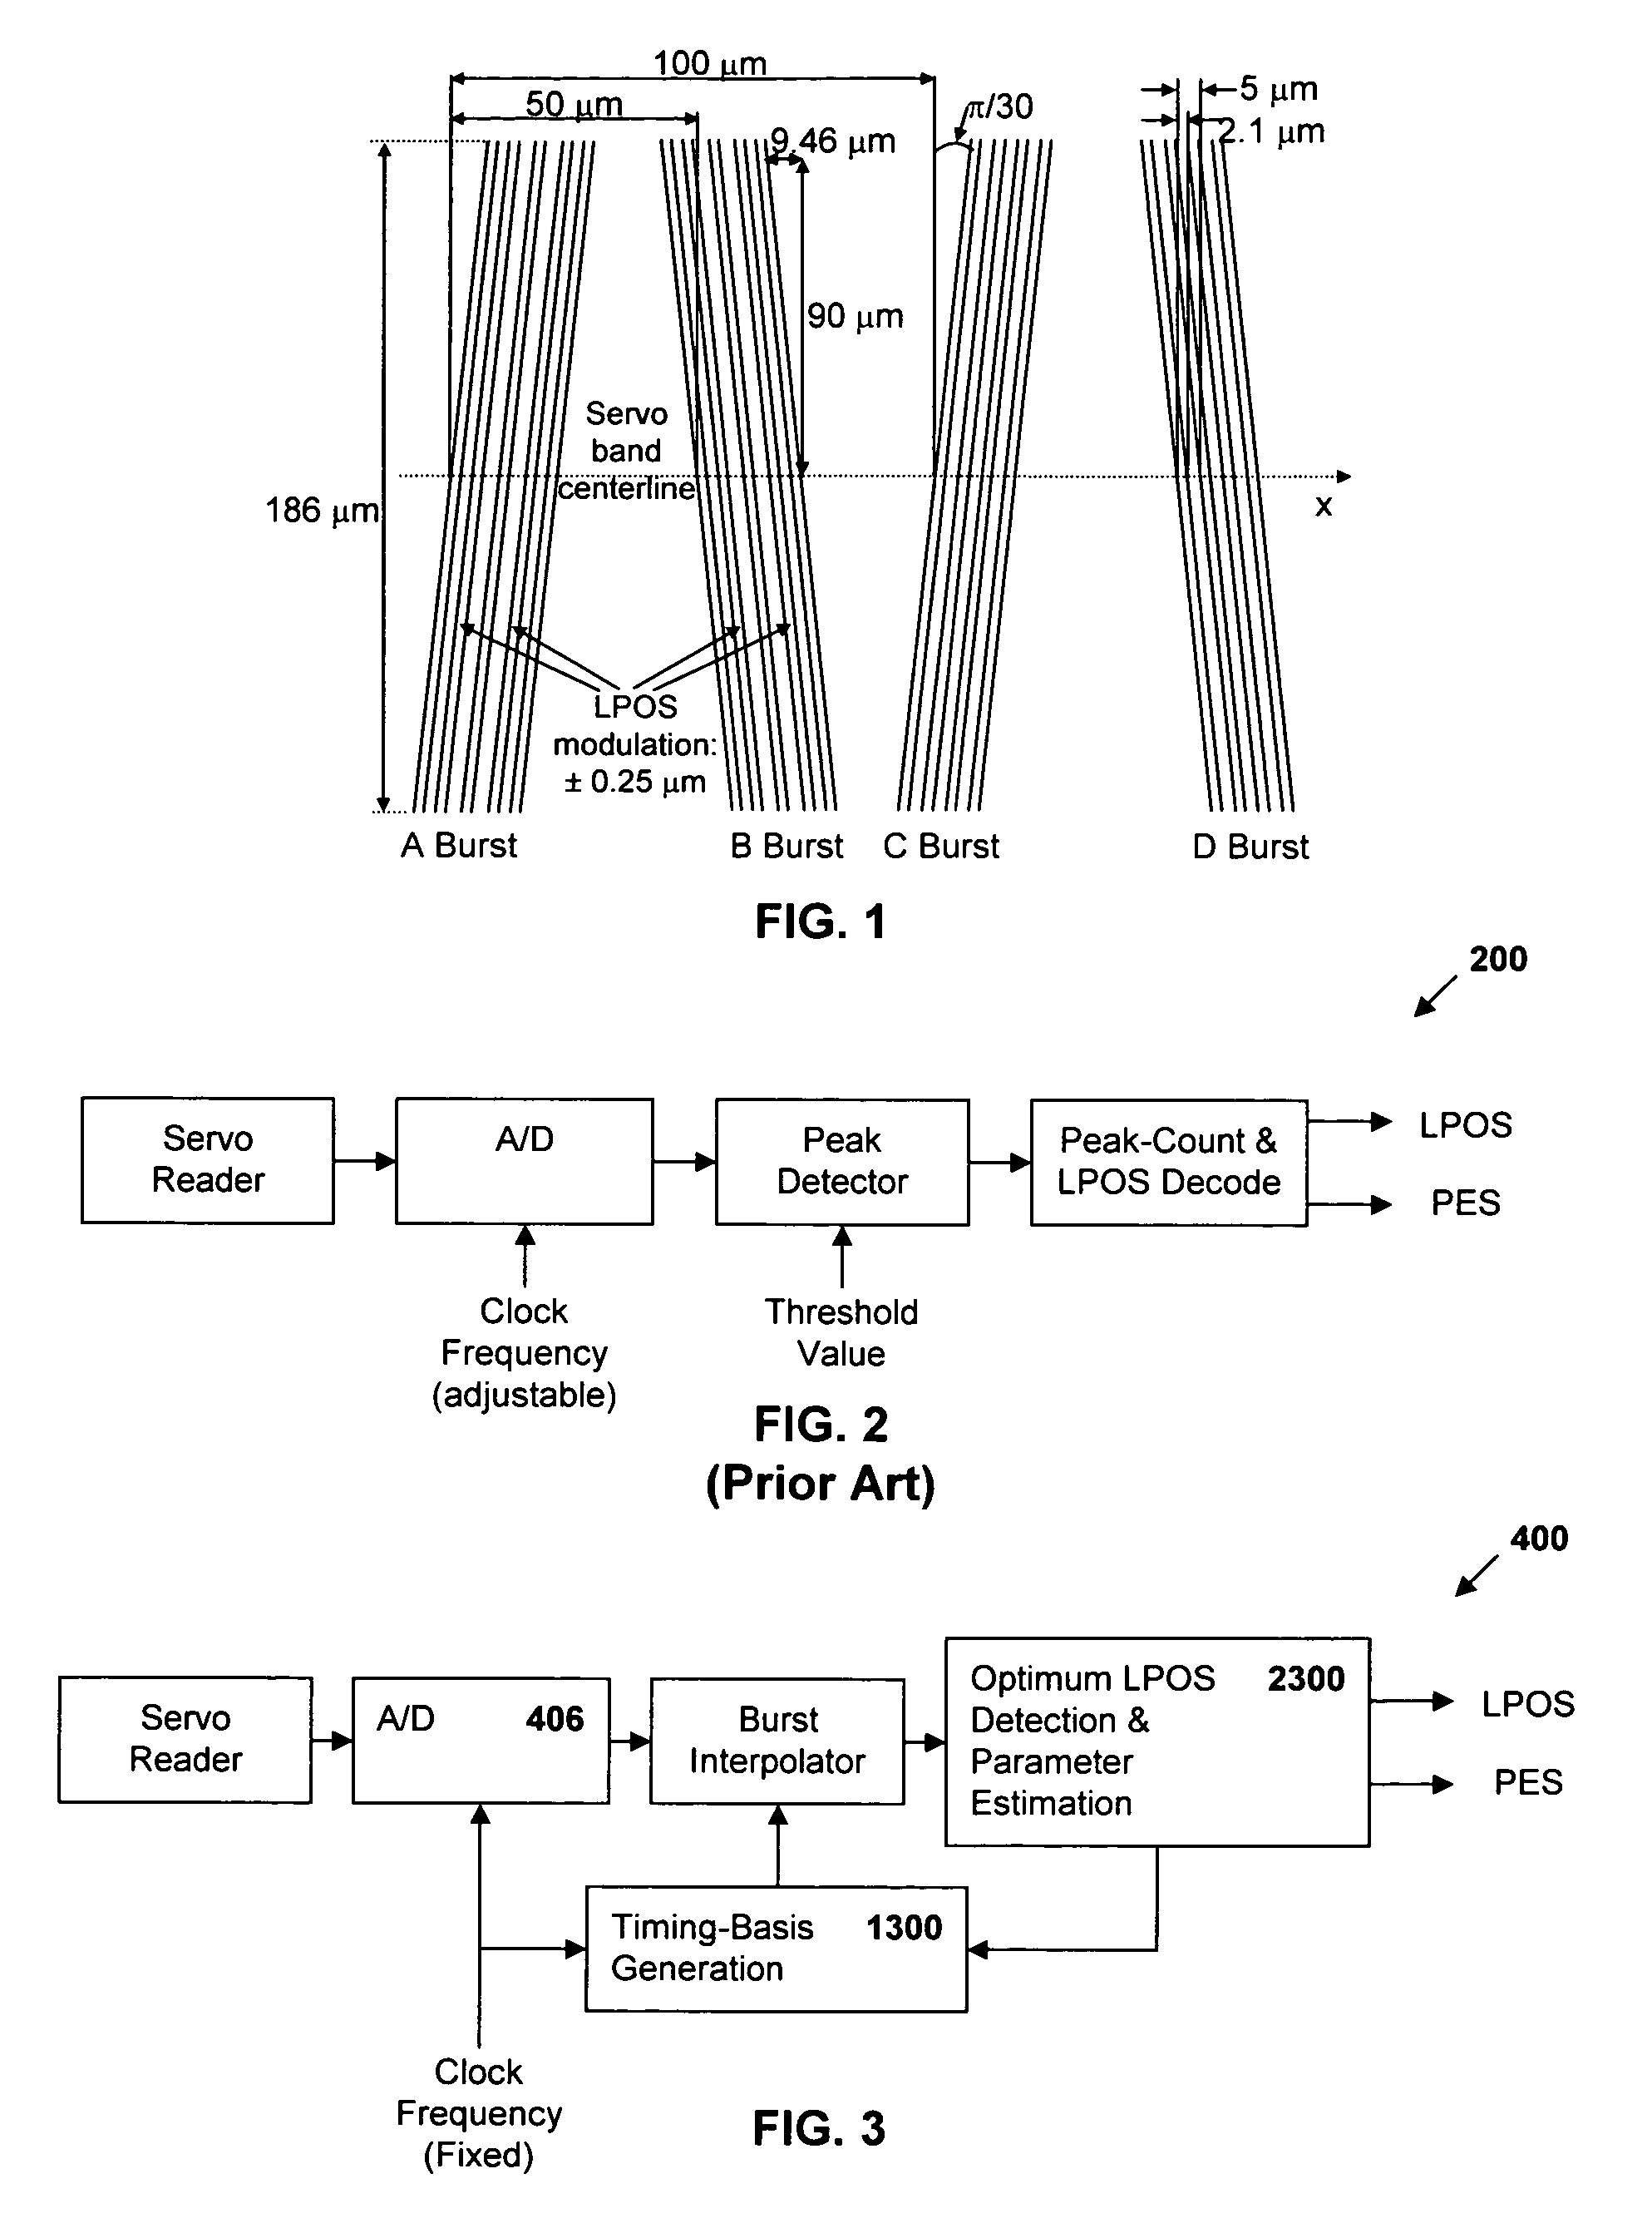 Synchronous servo channel for longitudinal position detection and position error signal generation in tape drive systems